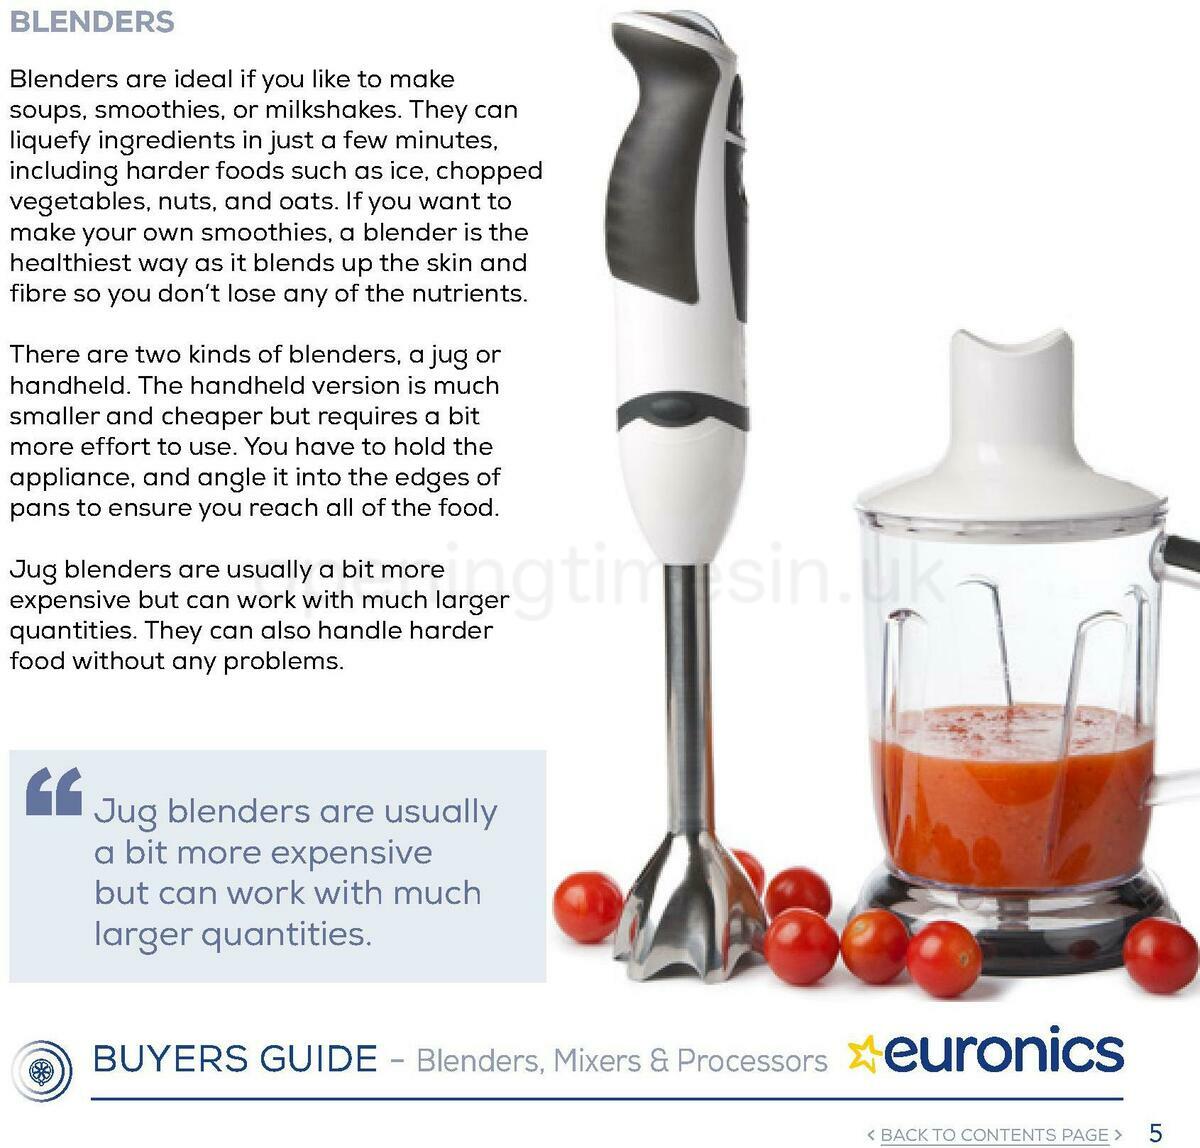 Euronics Blenders, Mixers & Processors Buyers Guide Offers from 1 January